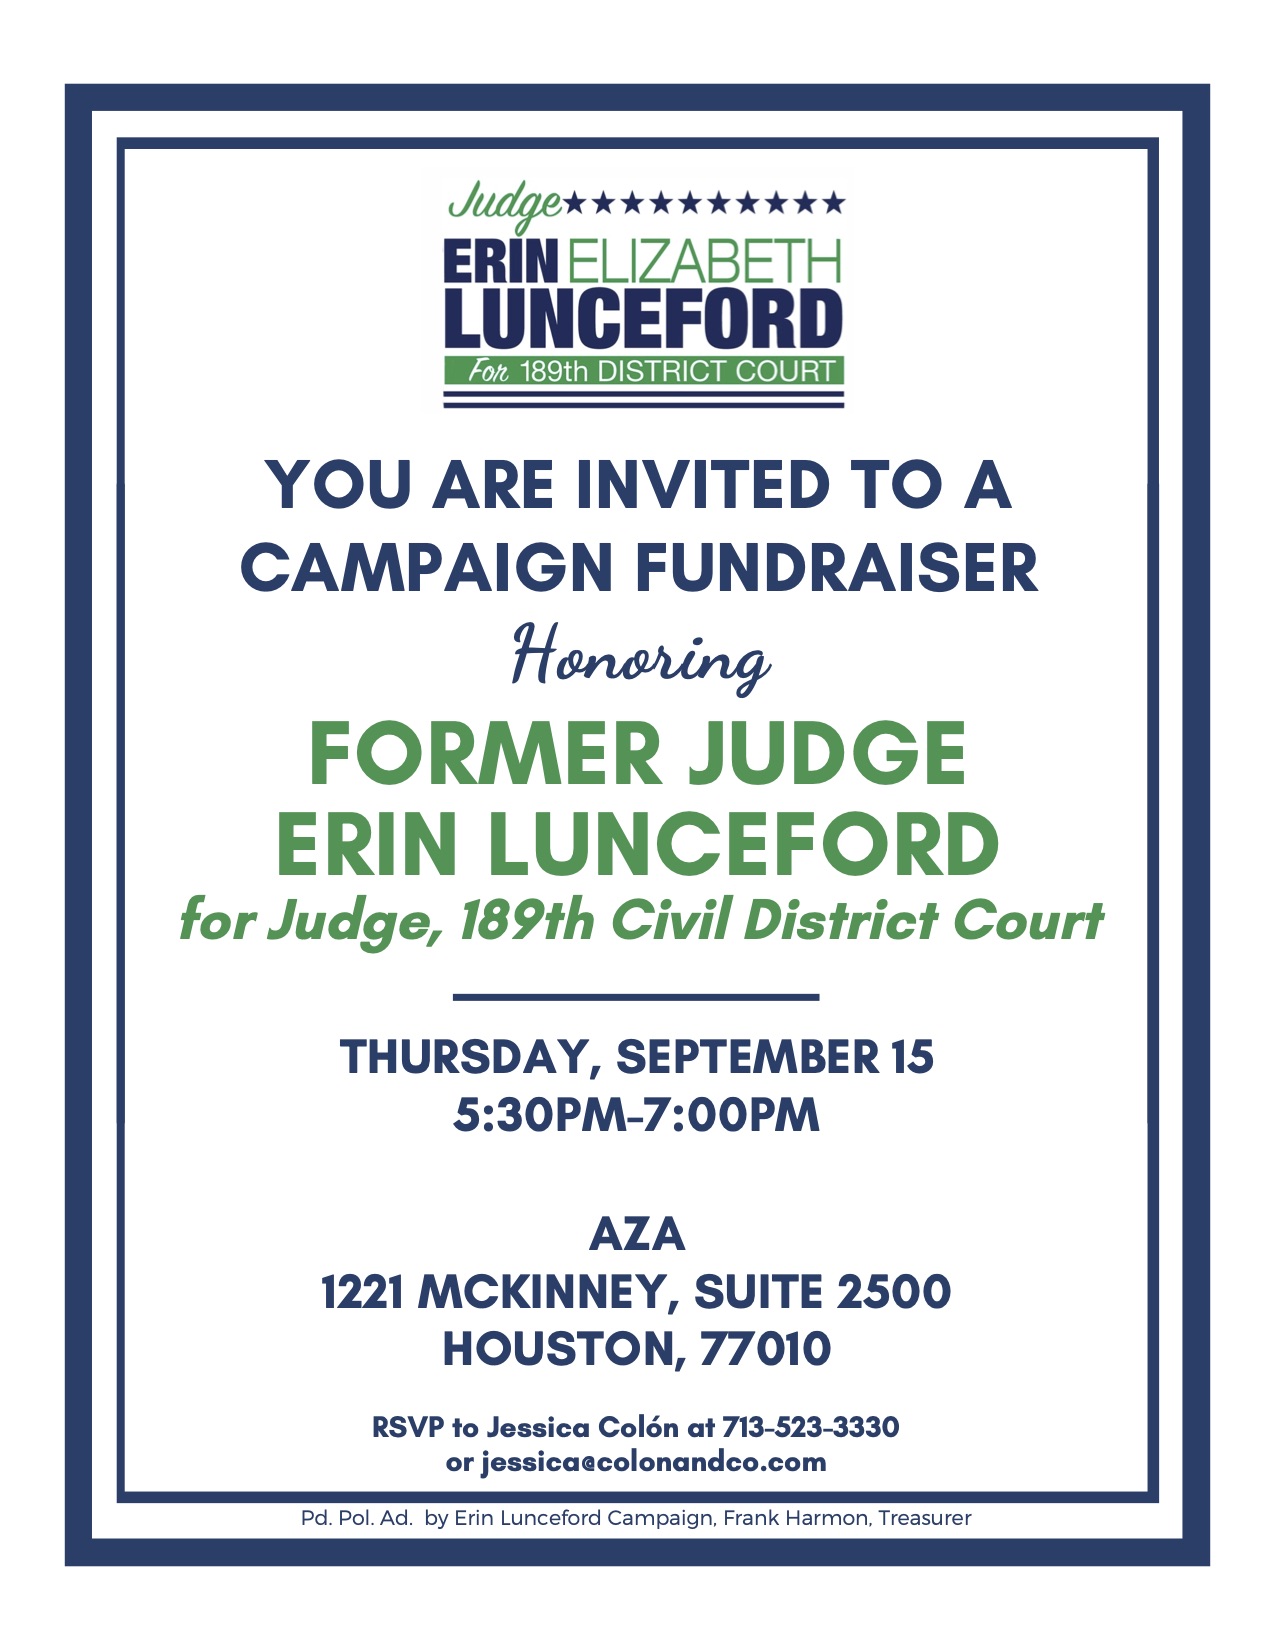 Photo of Campaign Fundraiser on September 15